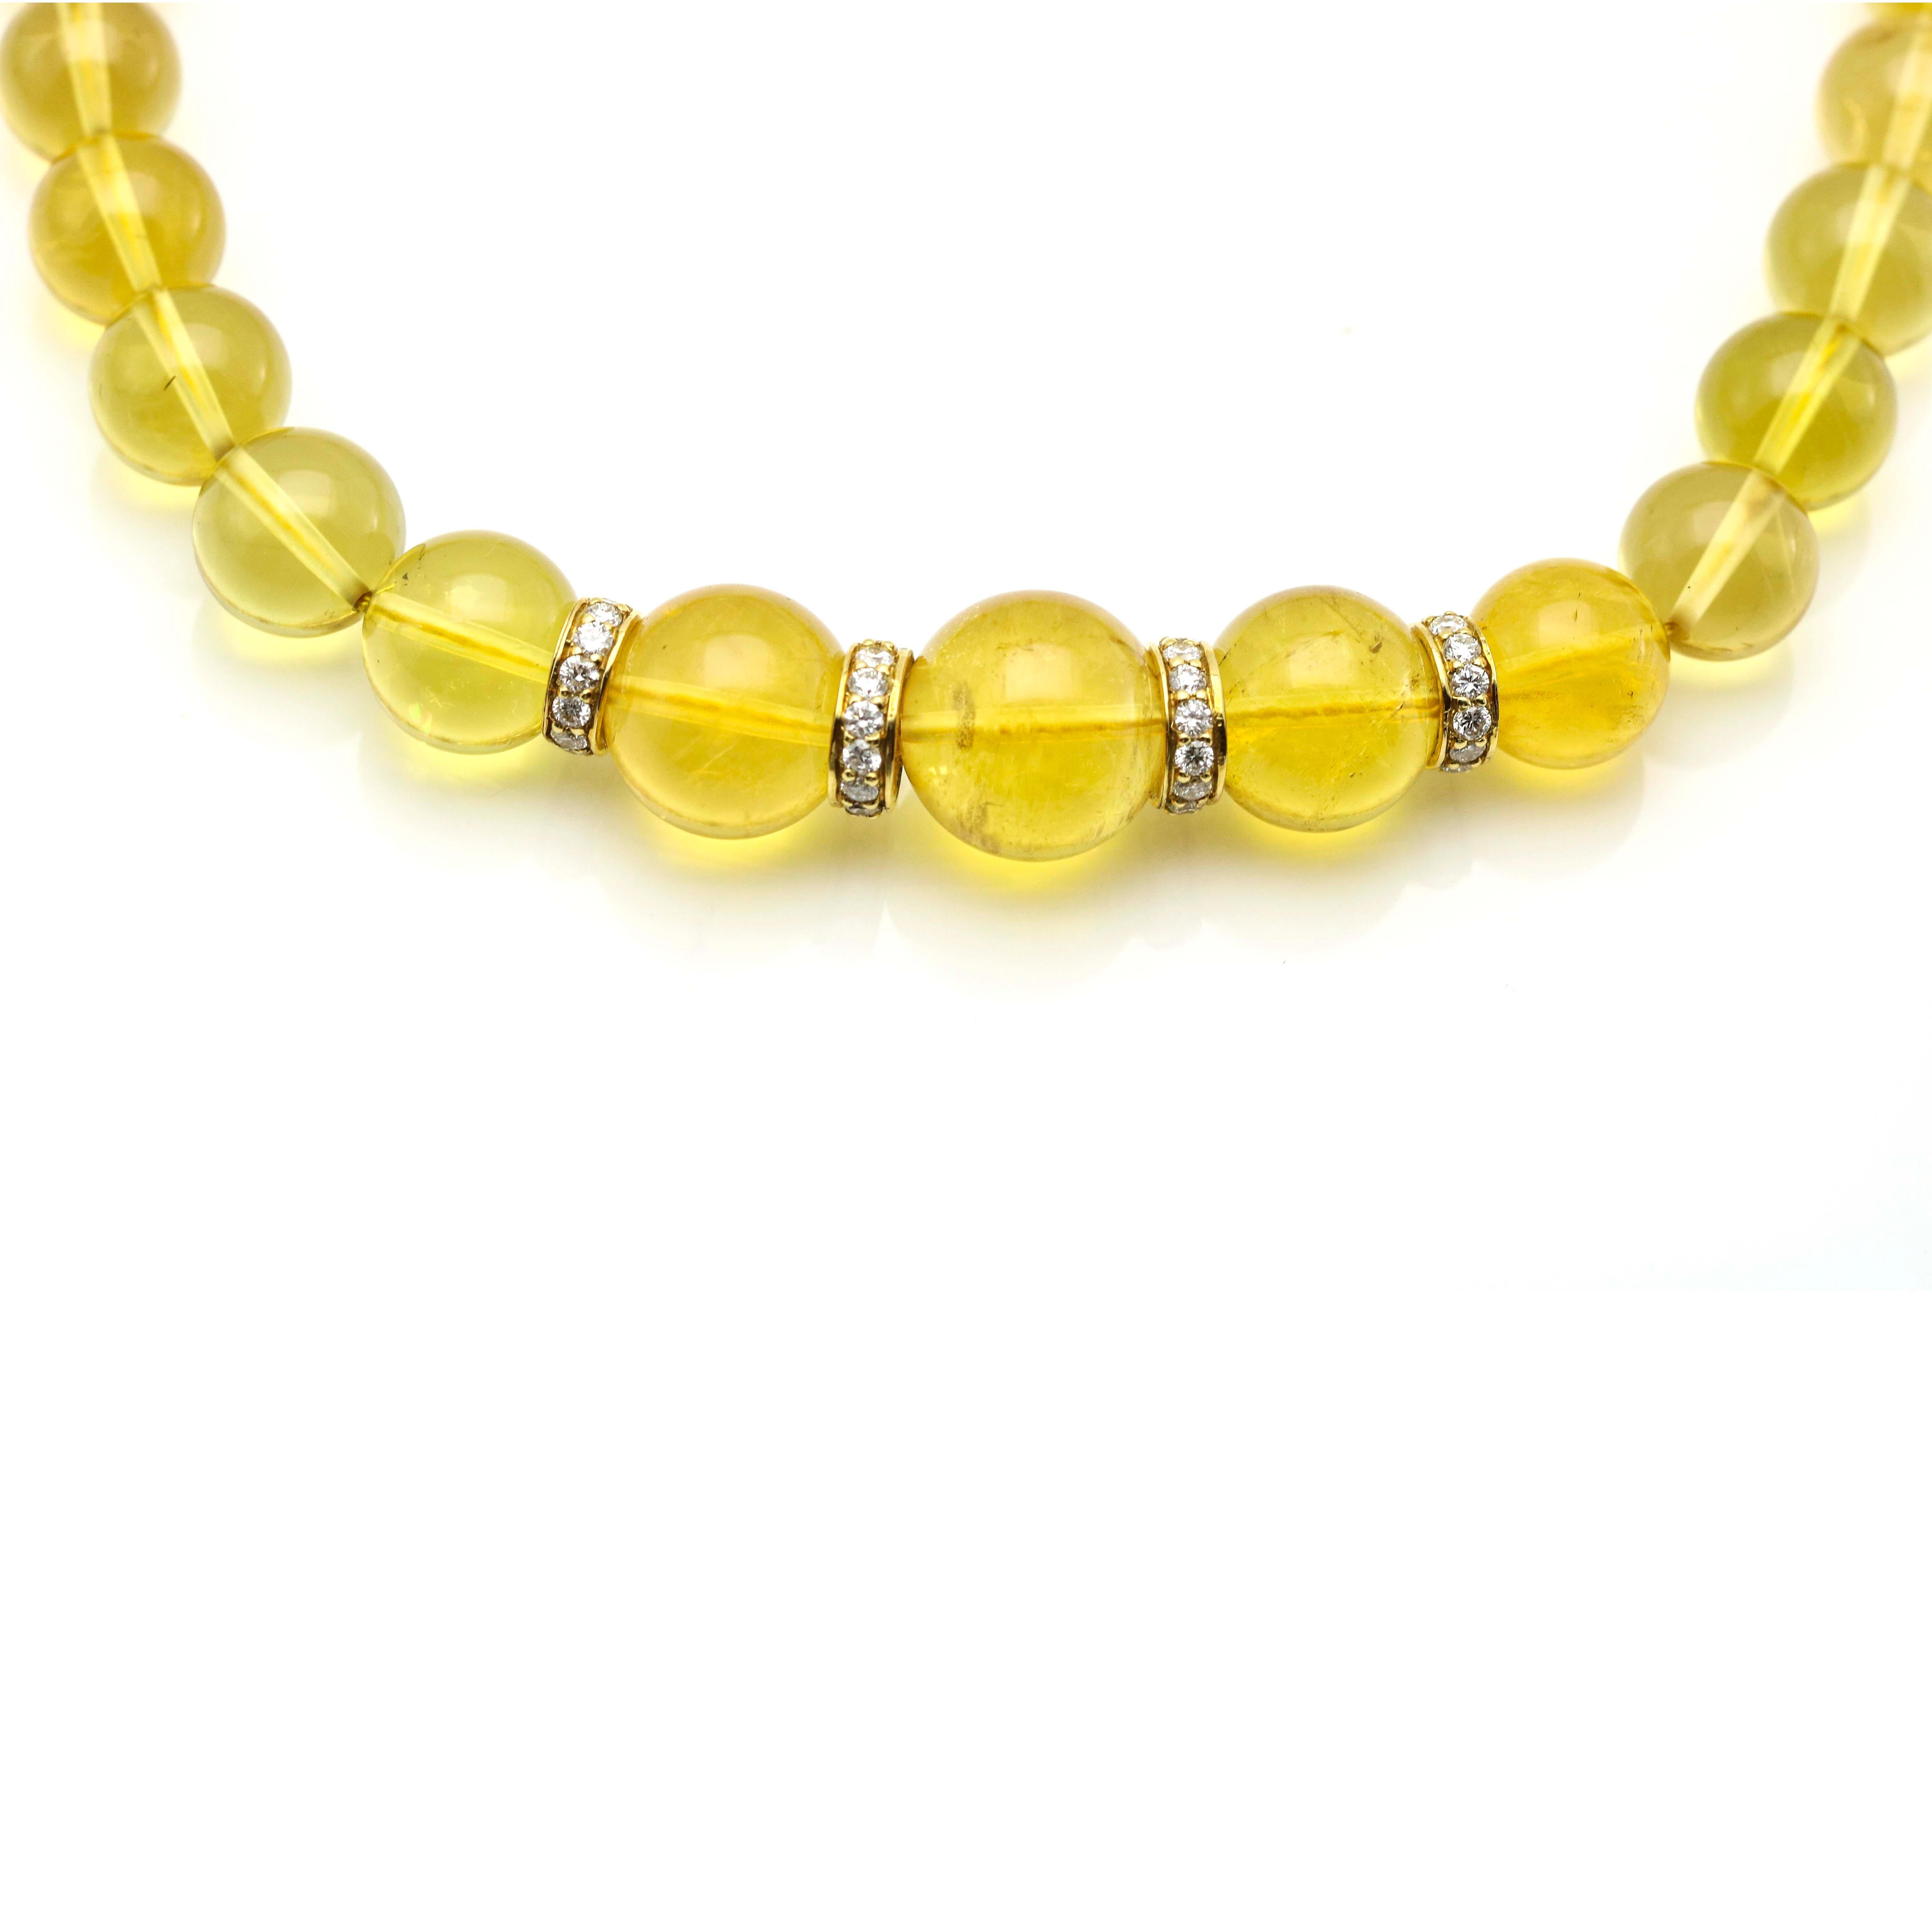 Graduated beryl bead necklace with large slide clasp encrusted with diamonds in 18 karat yellow gold. The necklace has 4 spacer beads pave set with round diamonds. Length, 18 inches. Beads, 15mm to 9mm. Weight, 91.4 grams. Diamond carat total